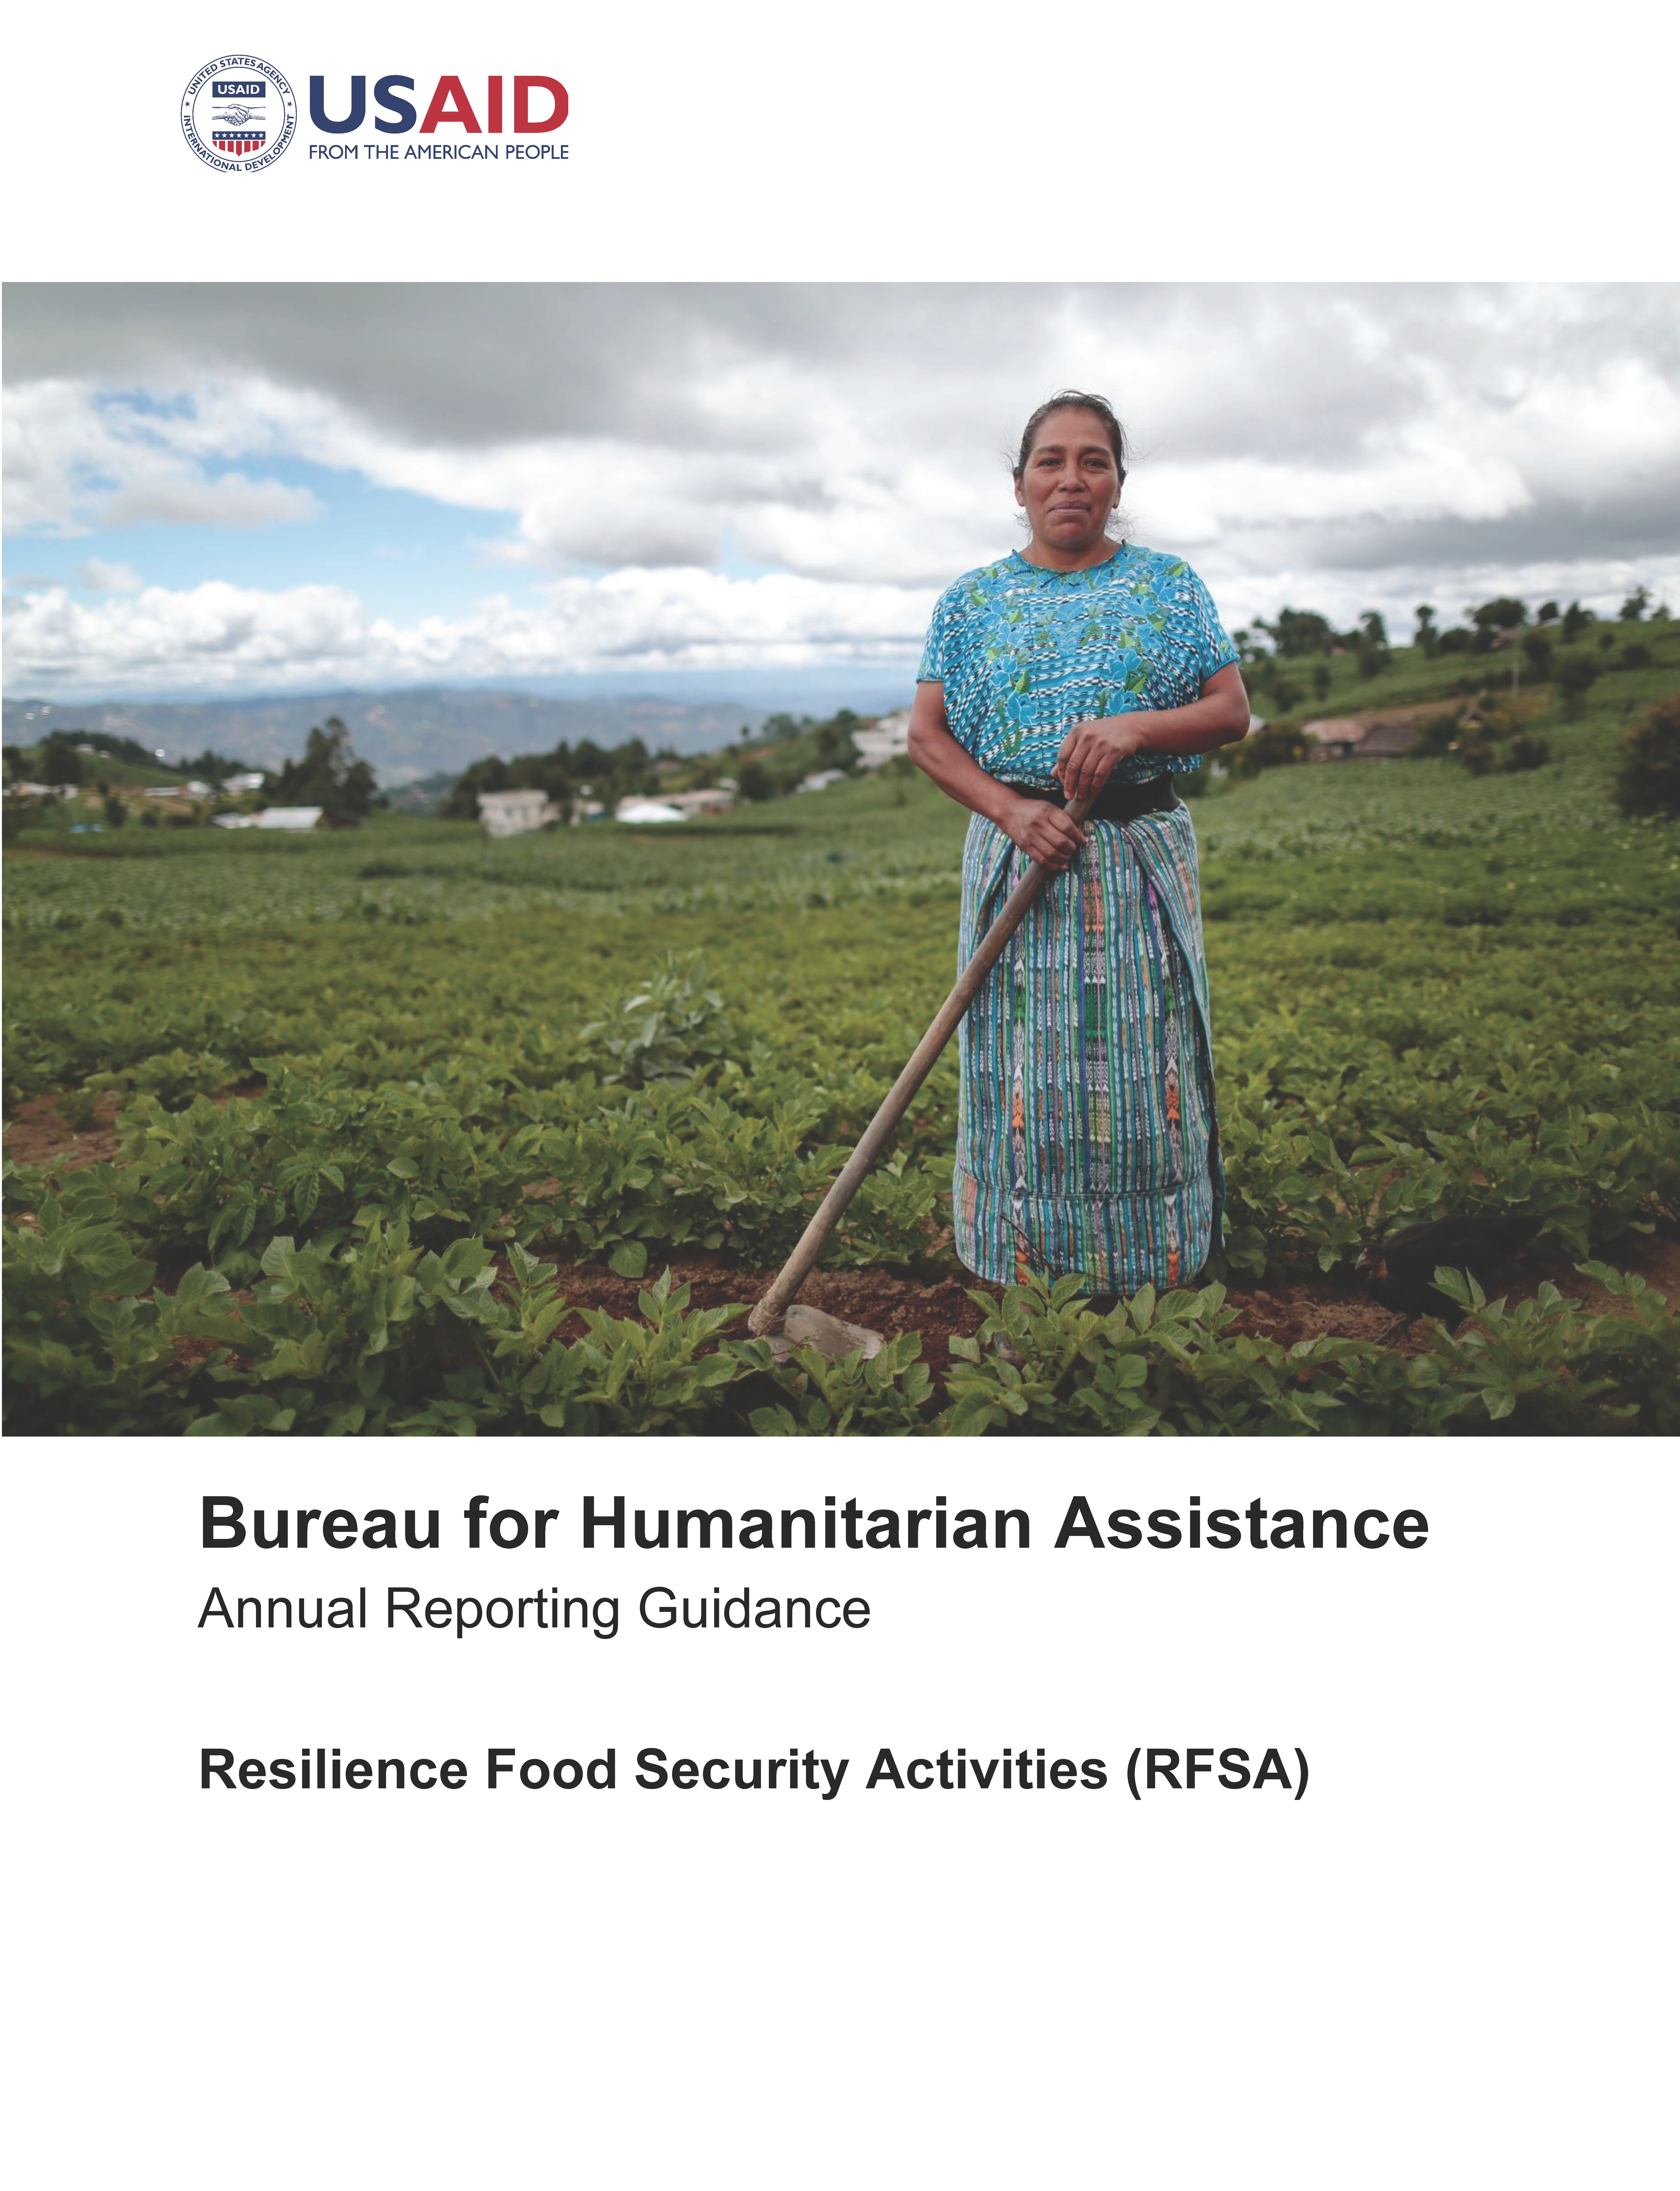 Bureau for Humanitarian Assistance Annual Reporting Guidance